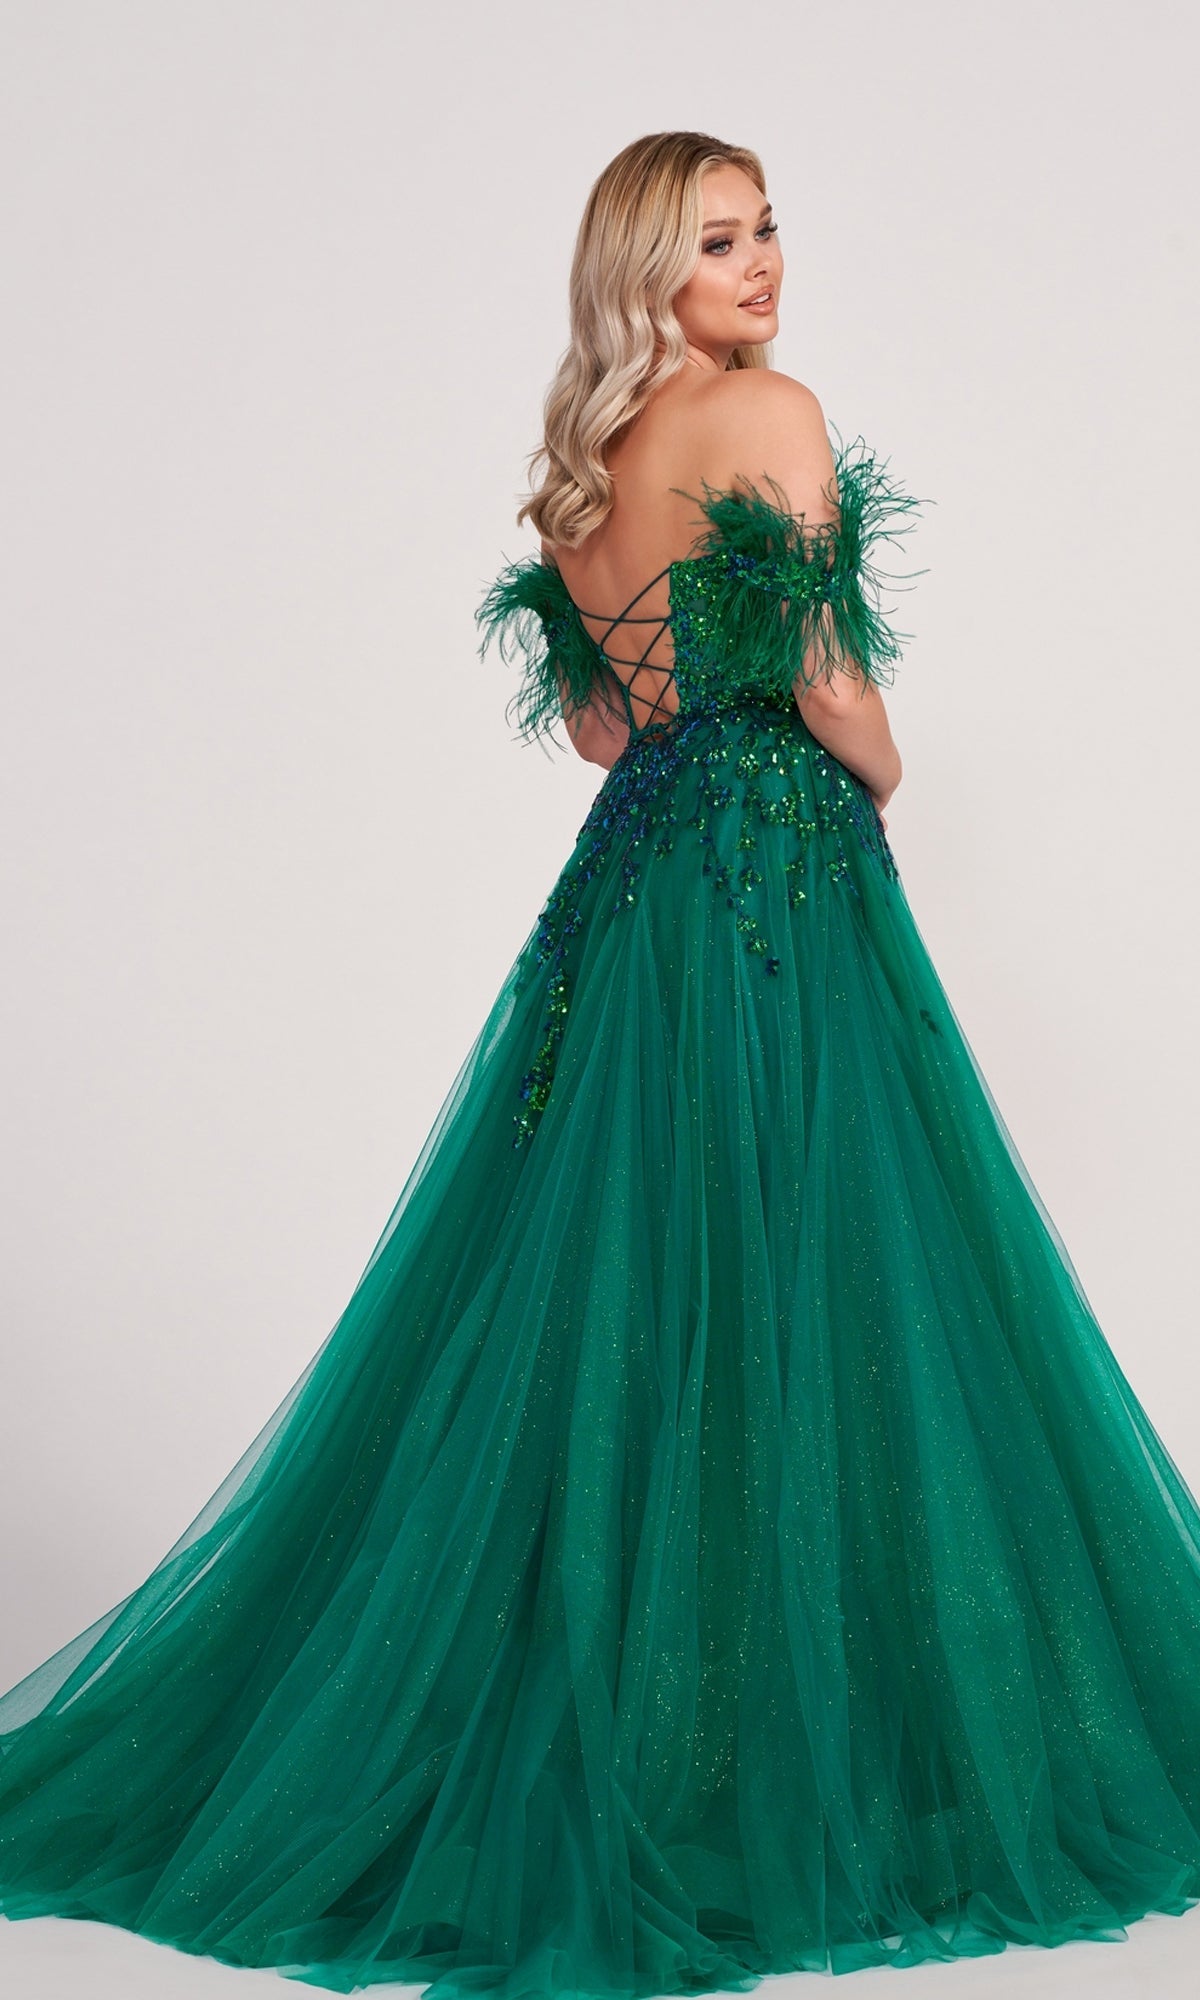  Ellie Wilde Ball Gown With Feather Off The Shoulder Details